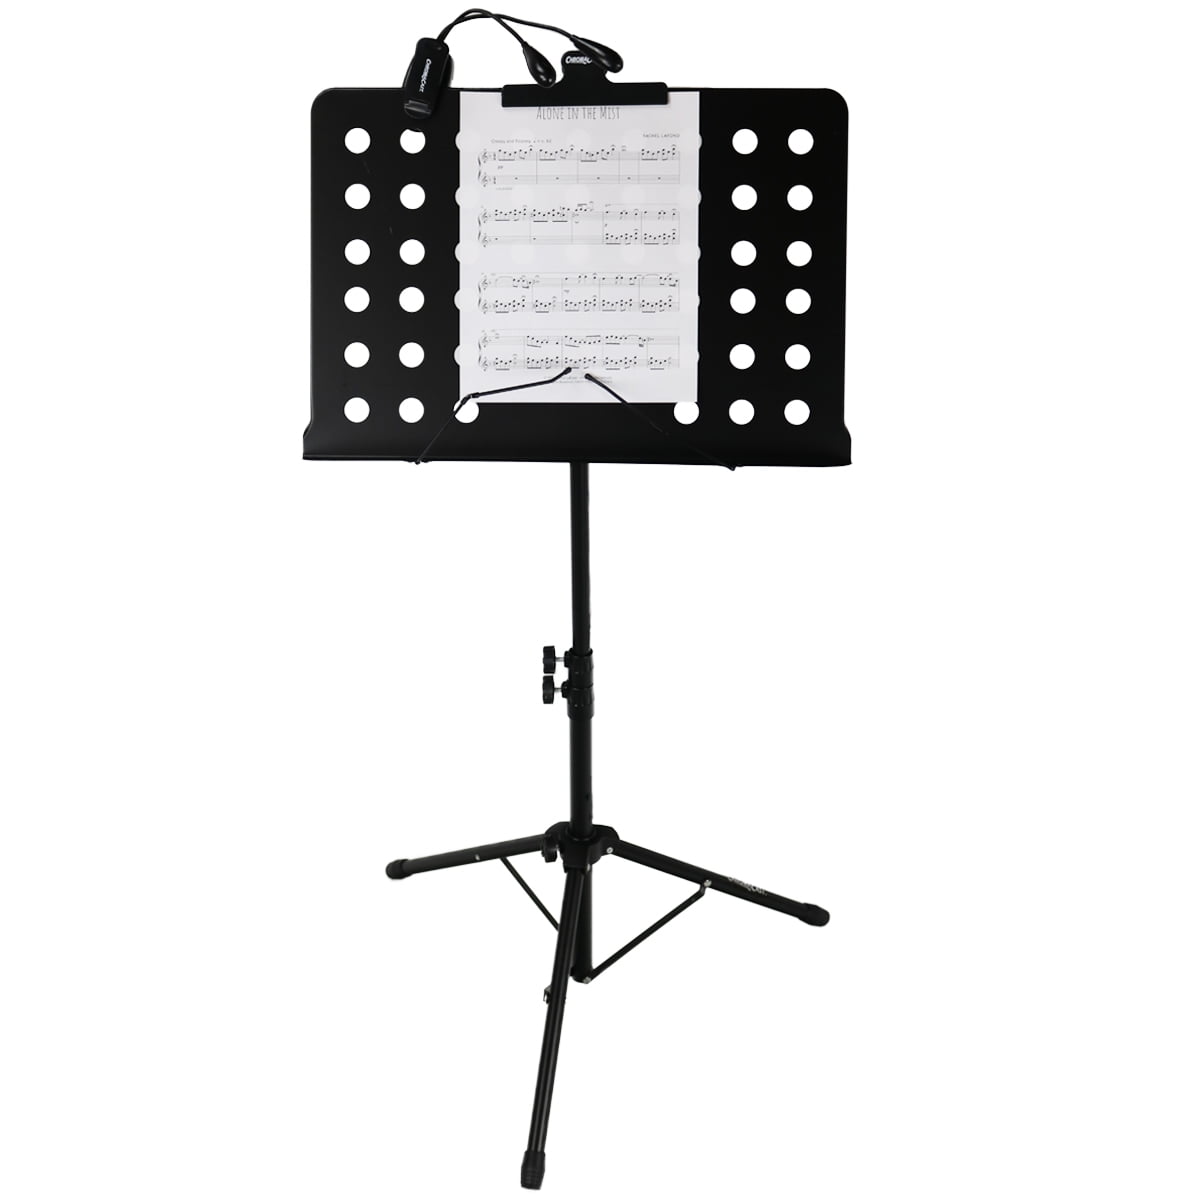 ChromaCast FBA_CC-PS-MSTAND-KIT-1 Pro Series Music Stand Performance Pack